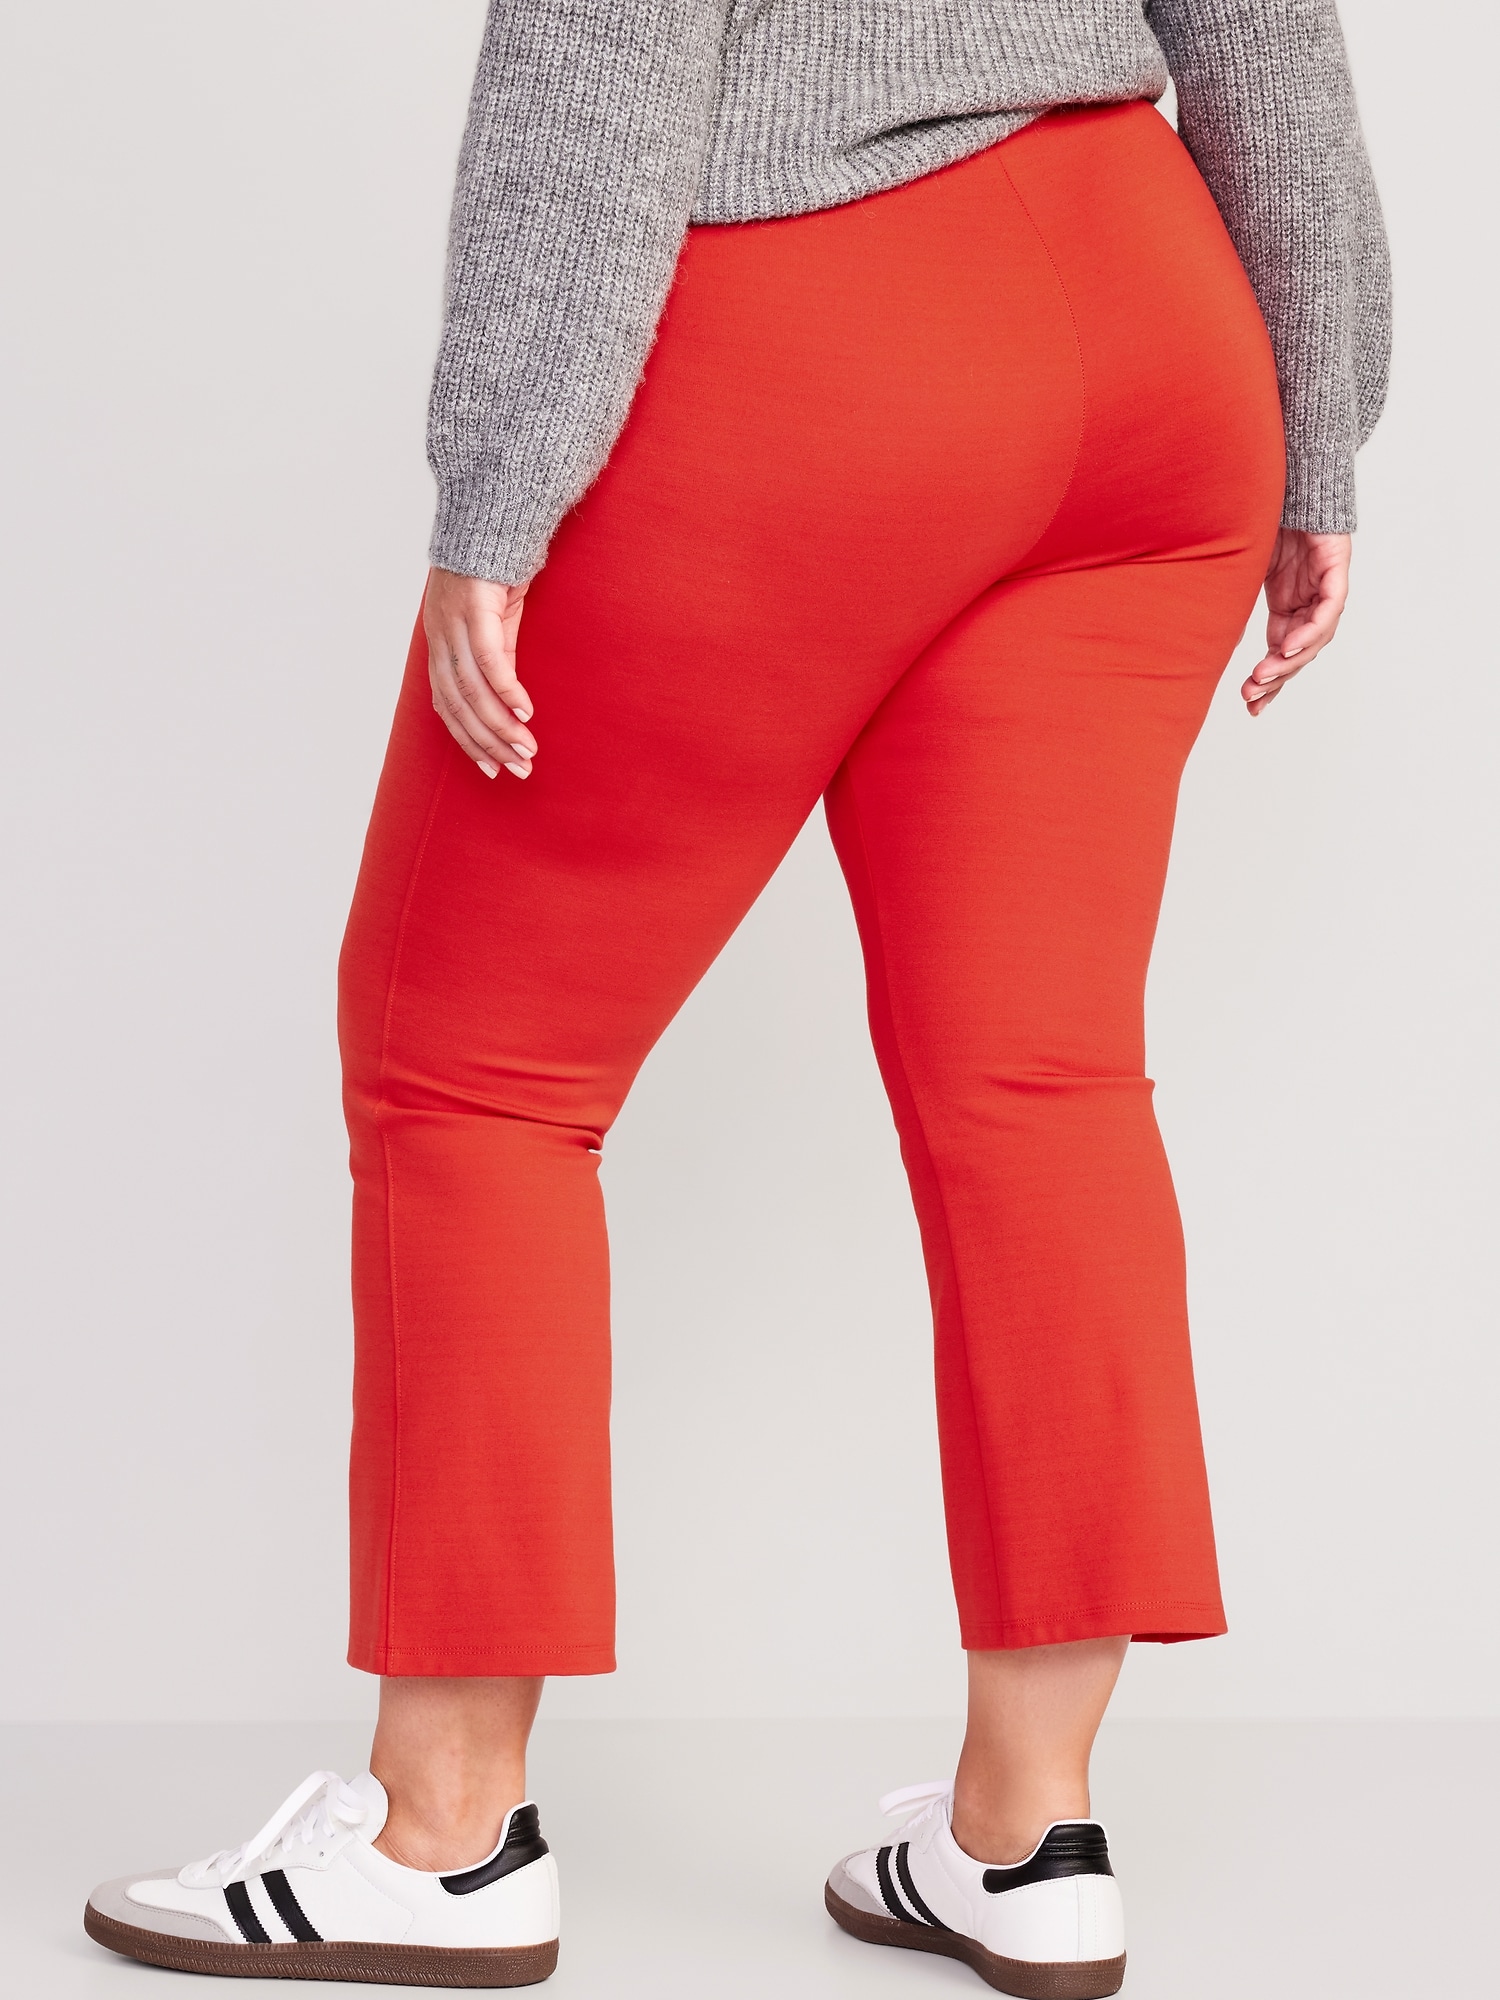 Extra High-Waisted Stevie Crop Kick Flare Pants for Women